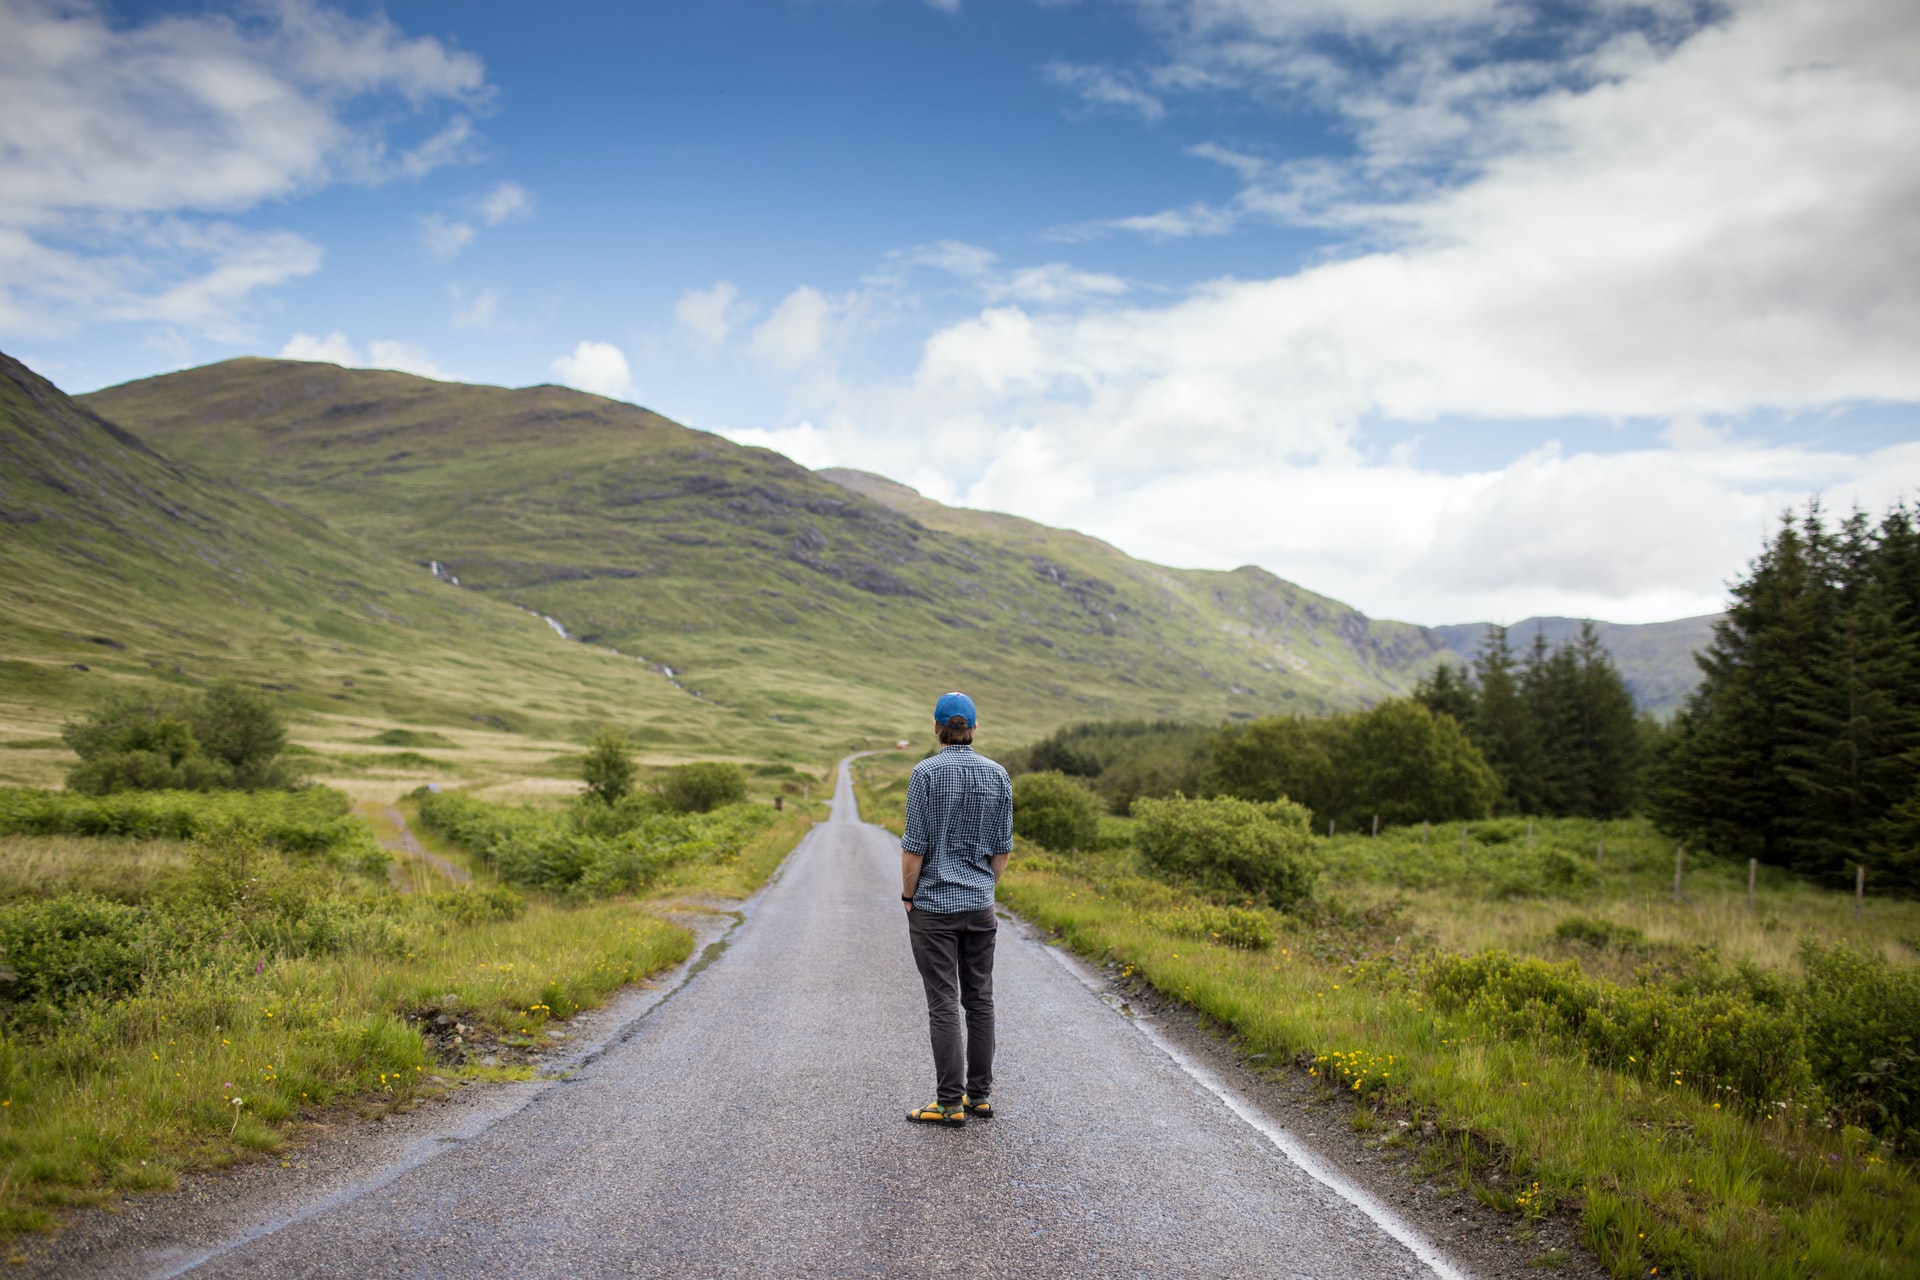 A man standing in the middle of a rural road on the Isle of Mull looking at hills in the distance.